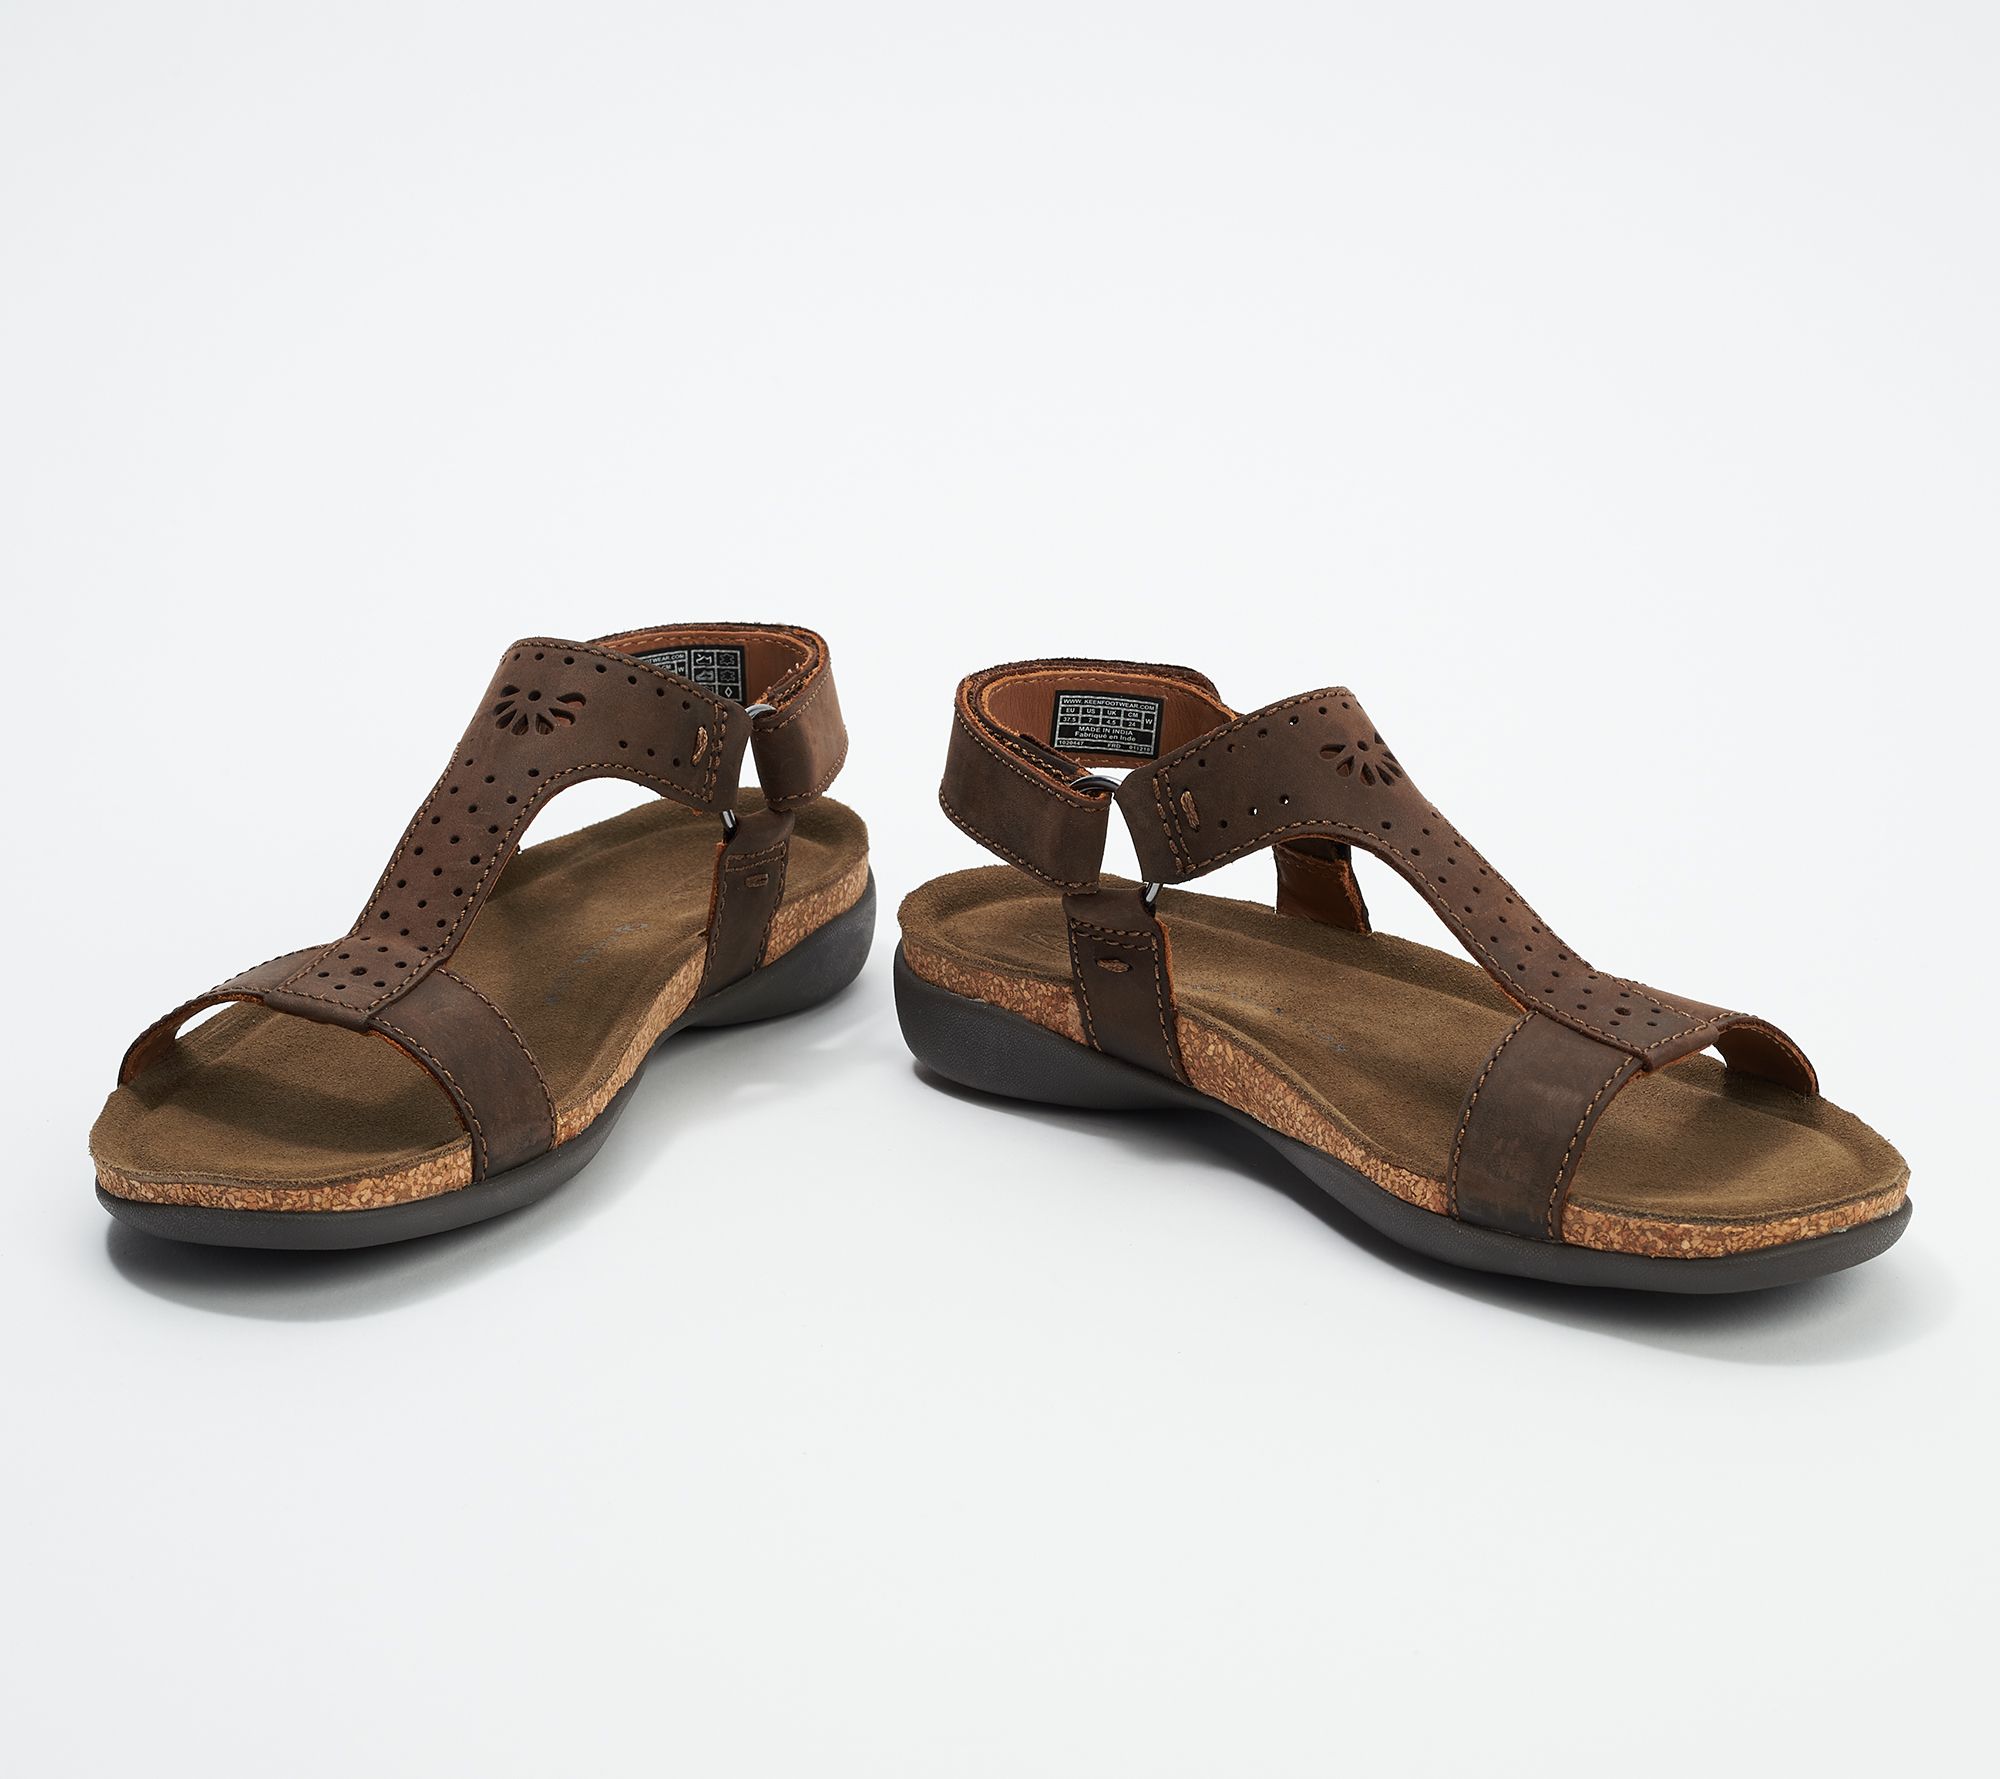 keen leather sandals